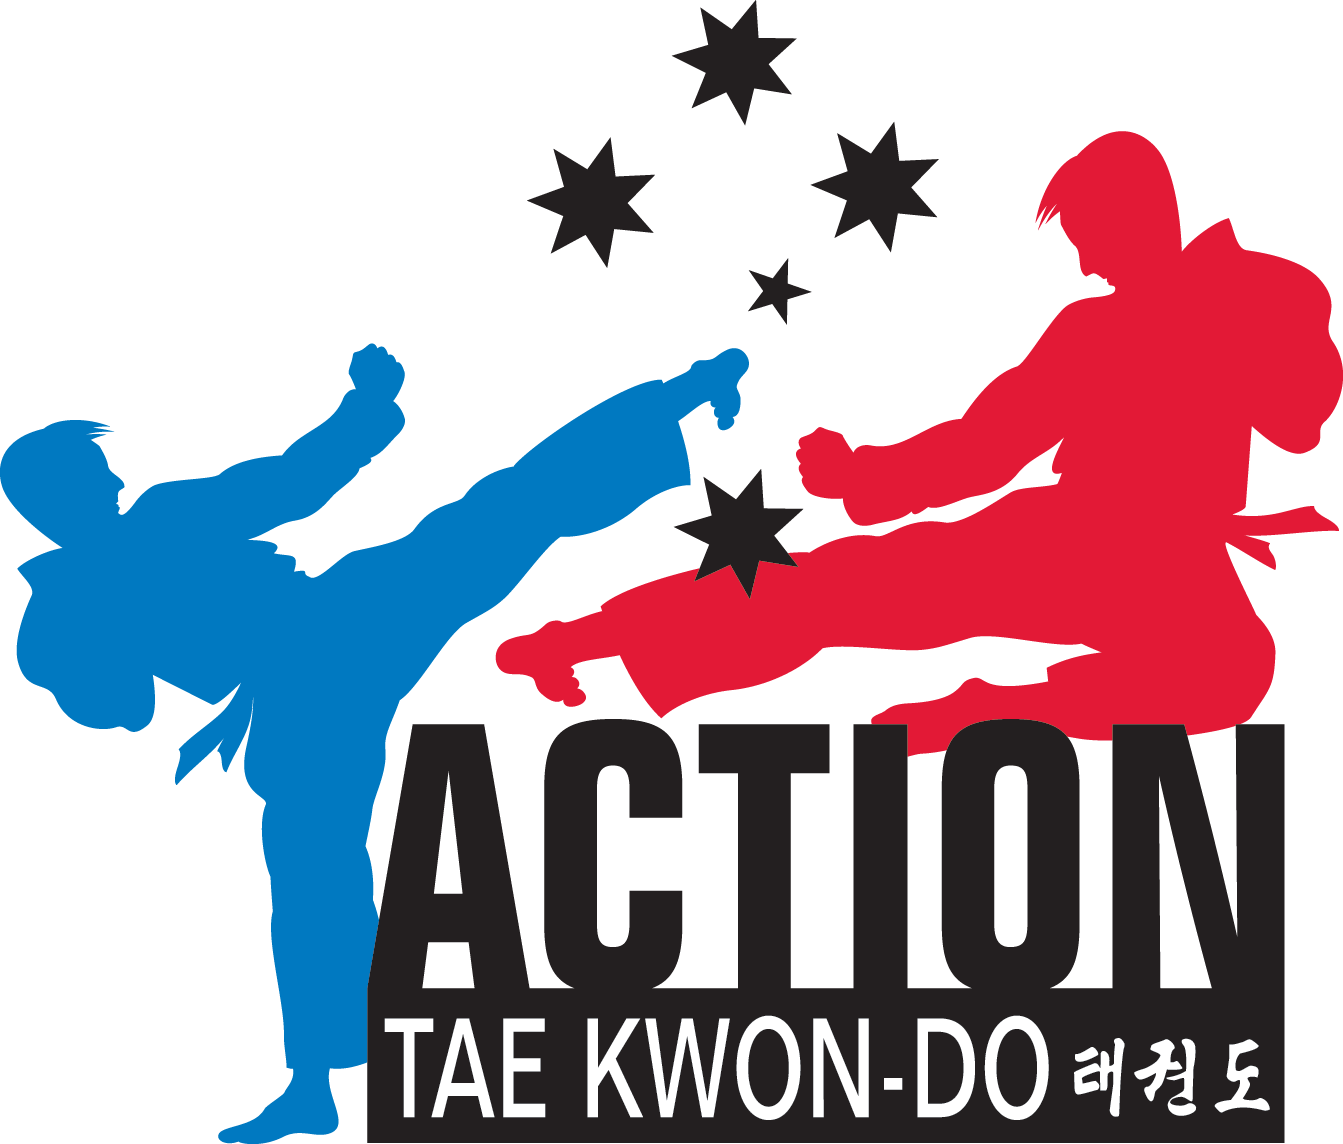 Action Tae Kwon-Do Logo (footer).